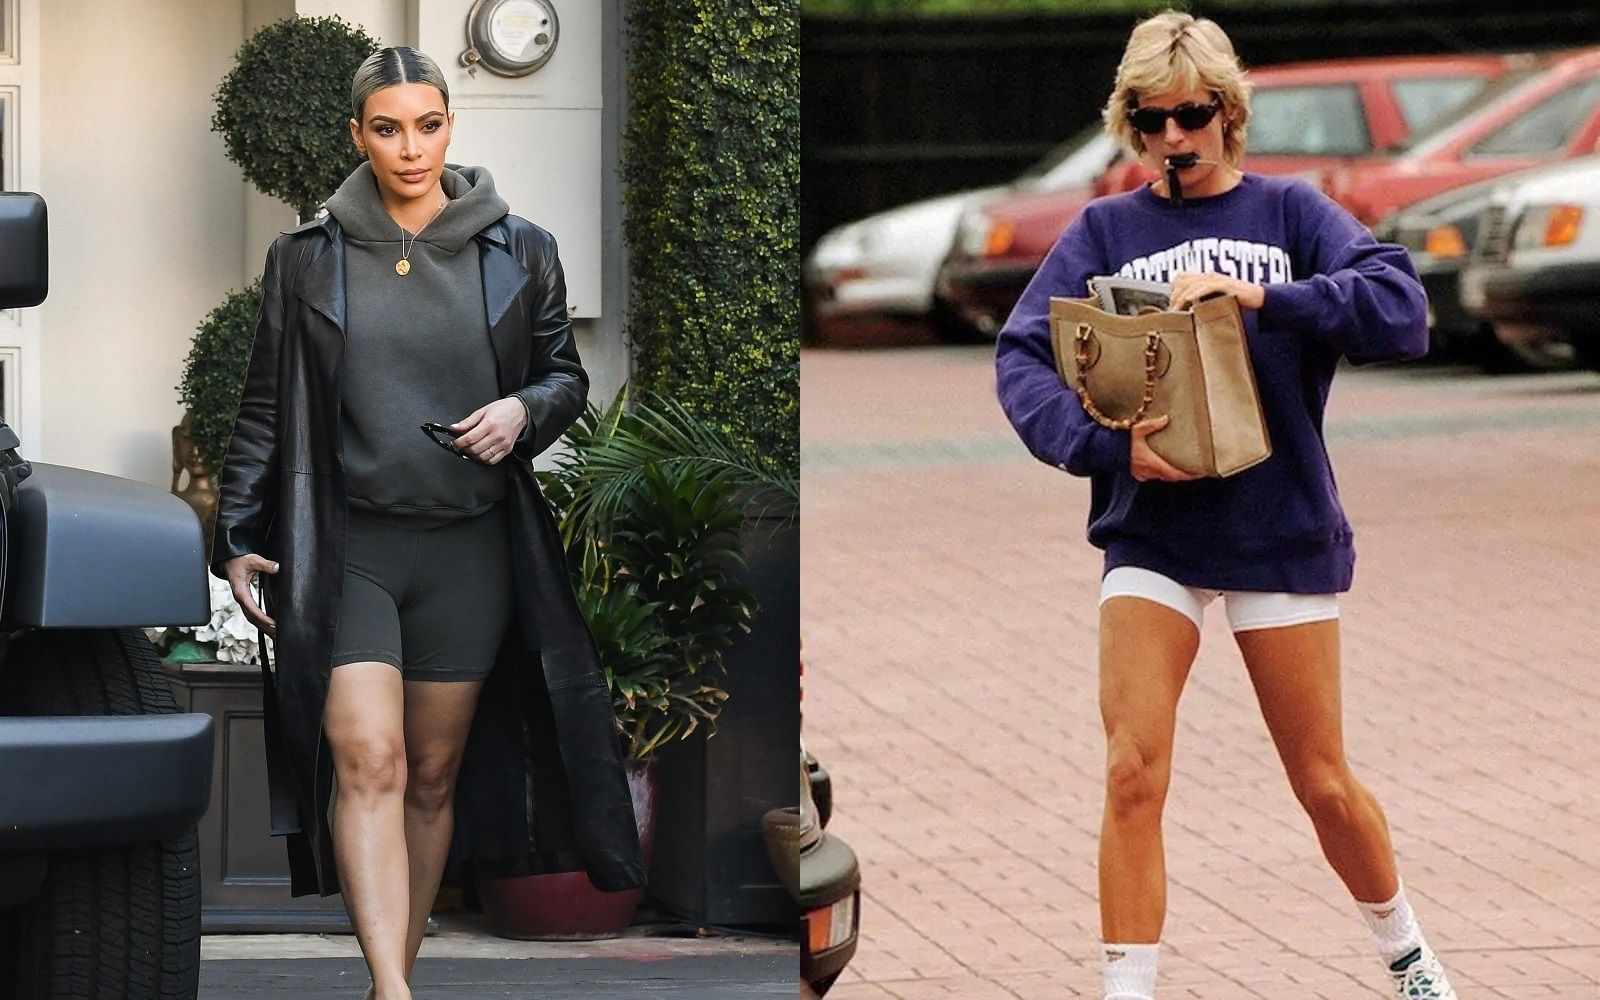 Photos from How Celebrities Wear Cycling Shorts